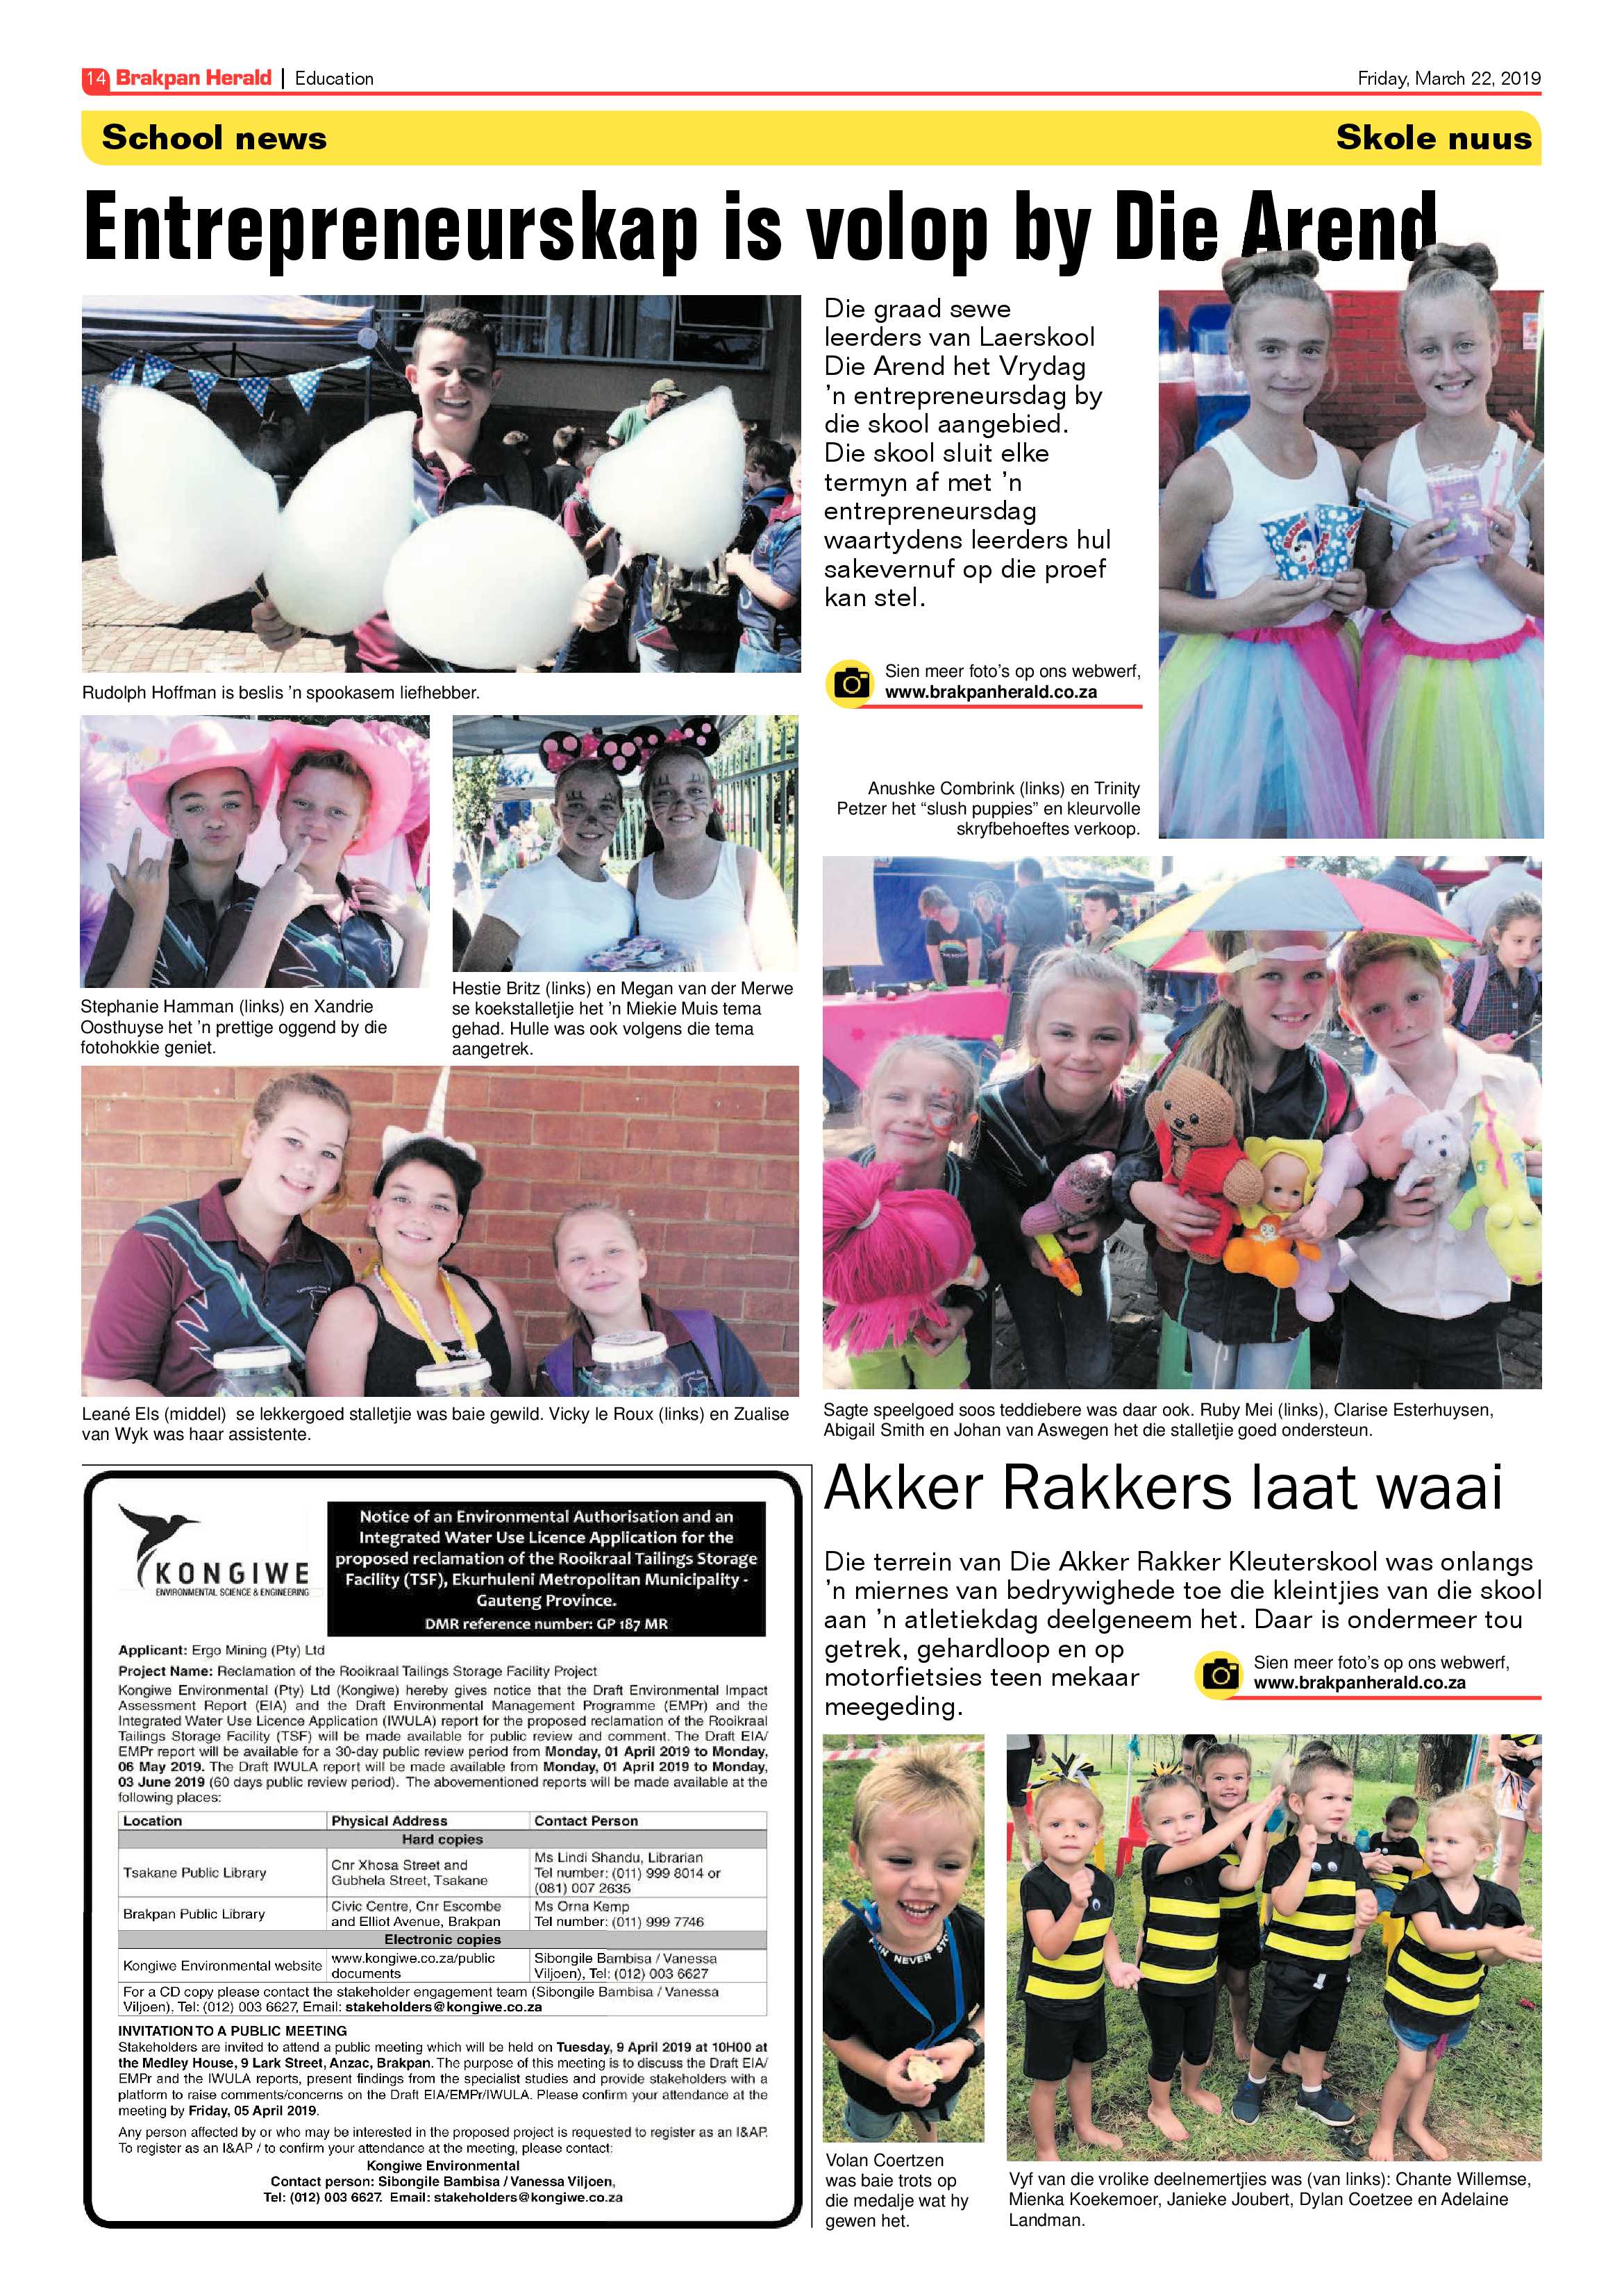 Brakpan Herald 22 March 2019 page 14